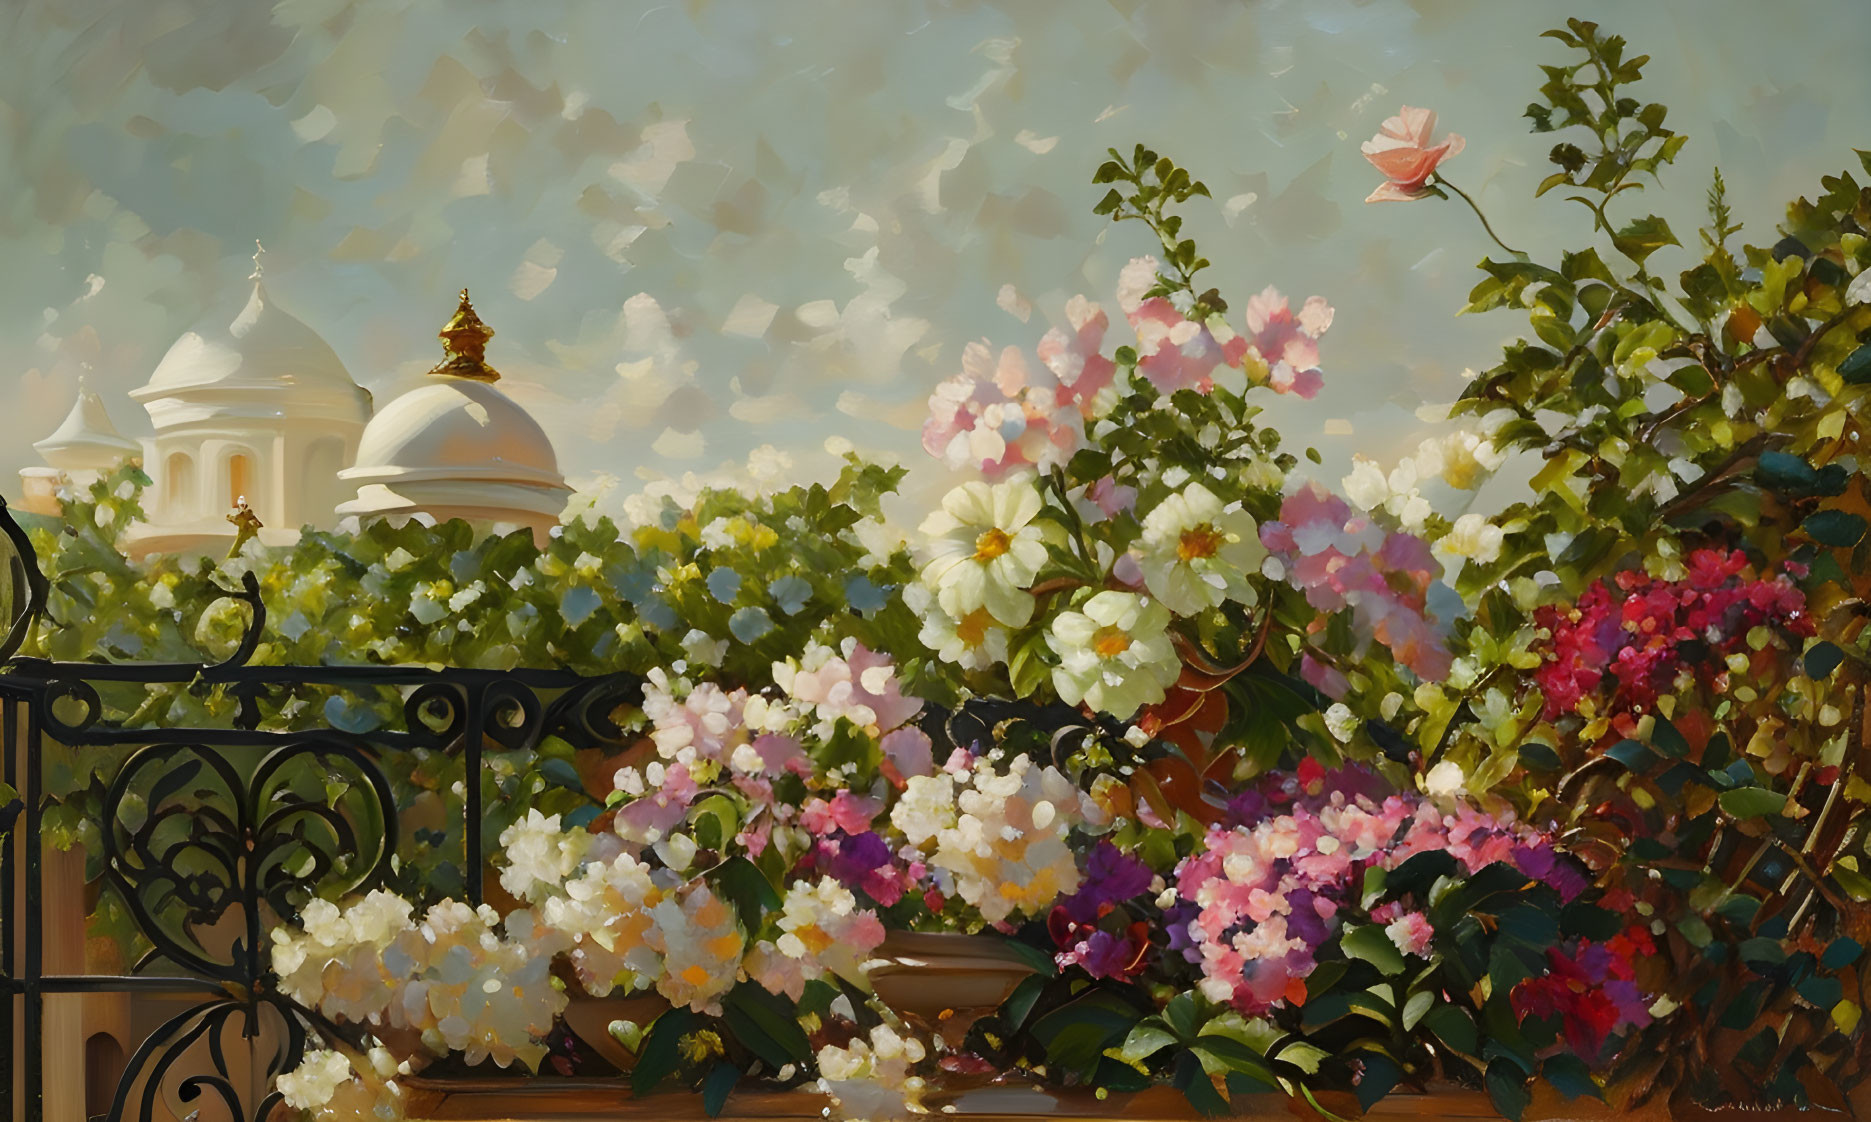 Colorful oil painting of blooming floral balcony with pink, white, and red flowers, classic dom